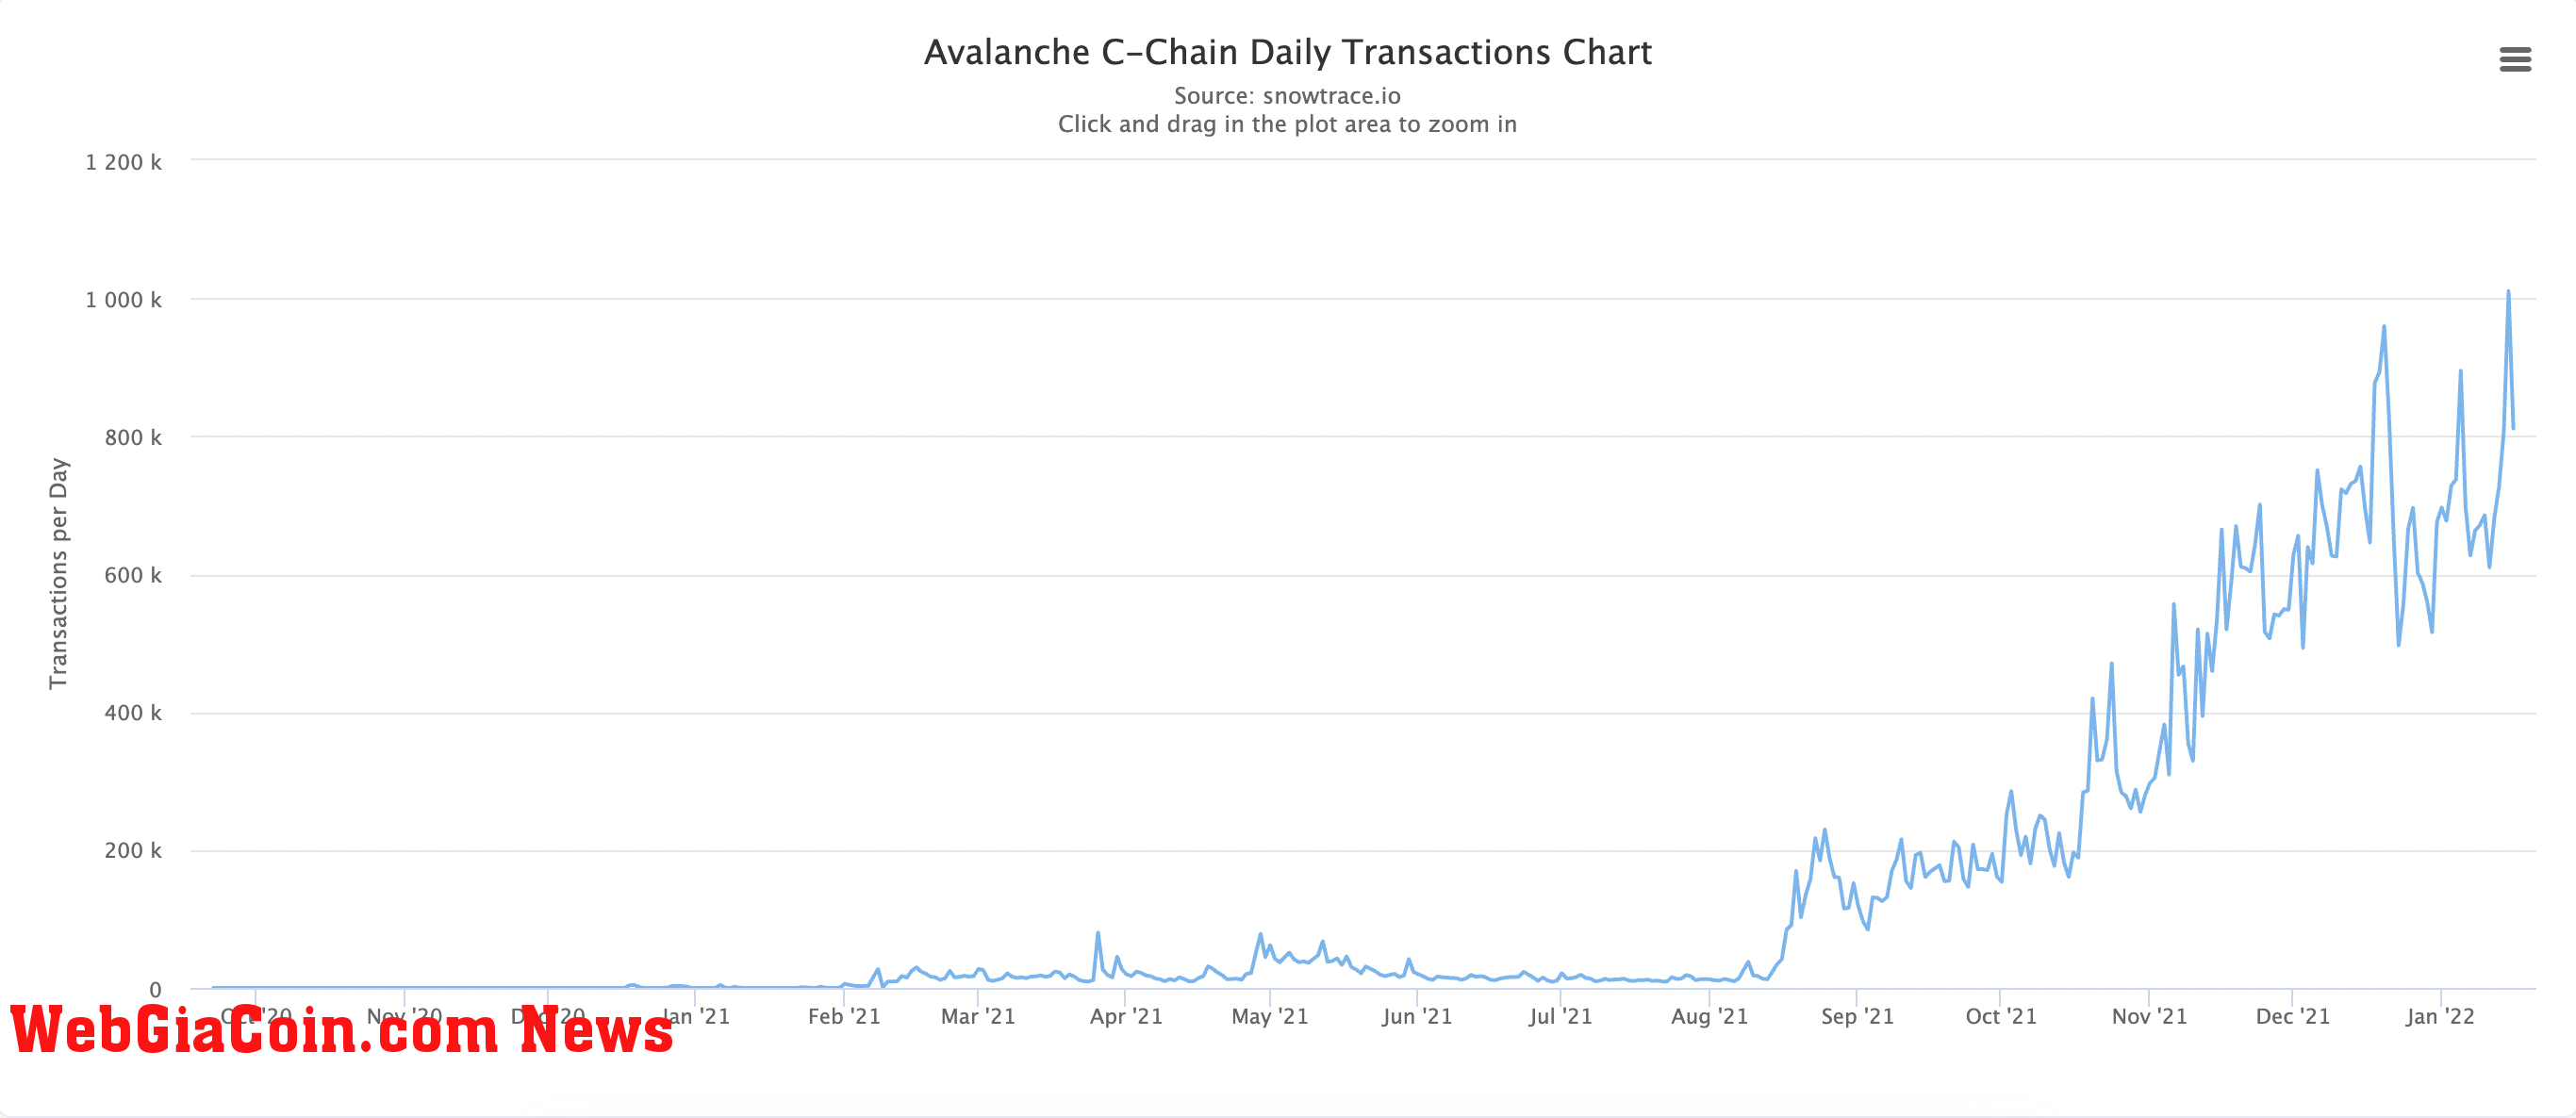 Avalanche C-Chain Daily Activity Transactions - Source, snowtrace.io